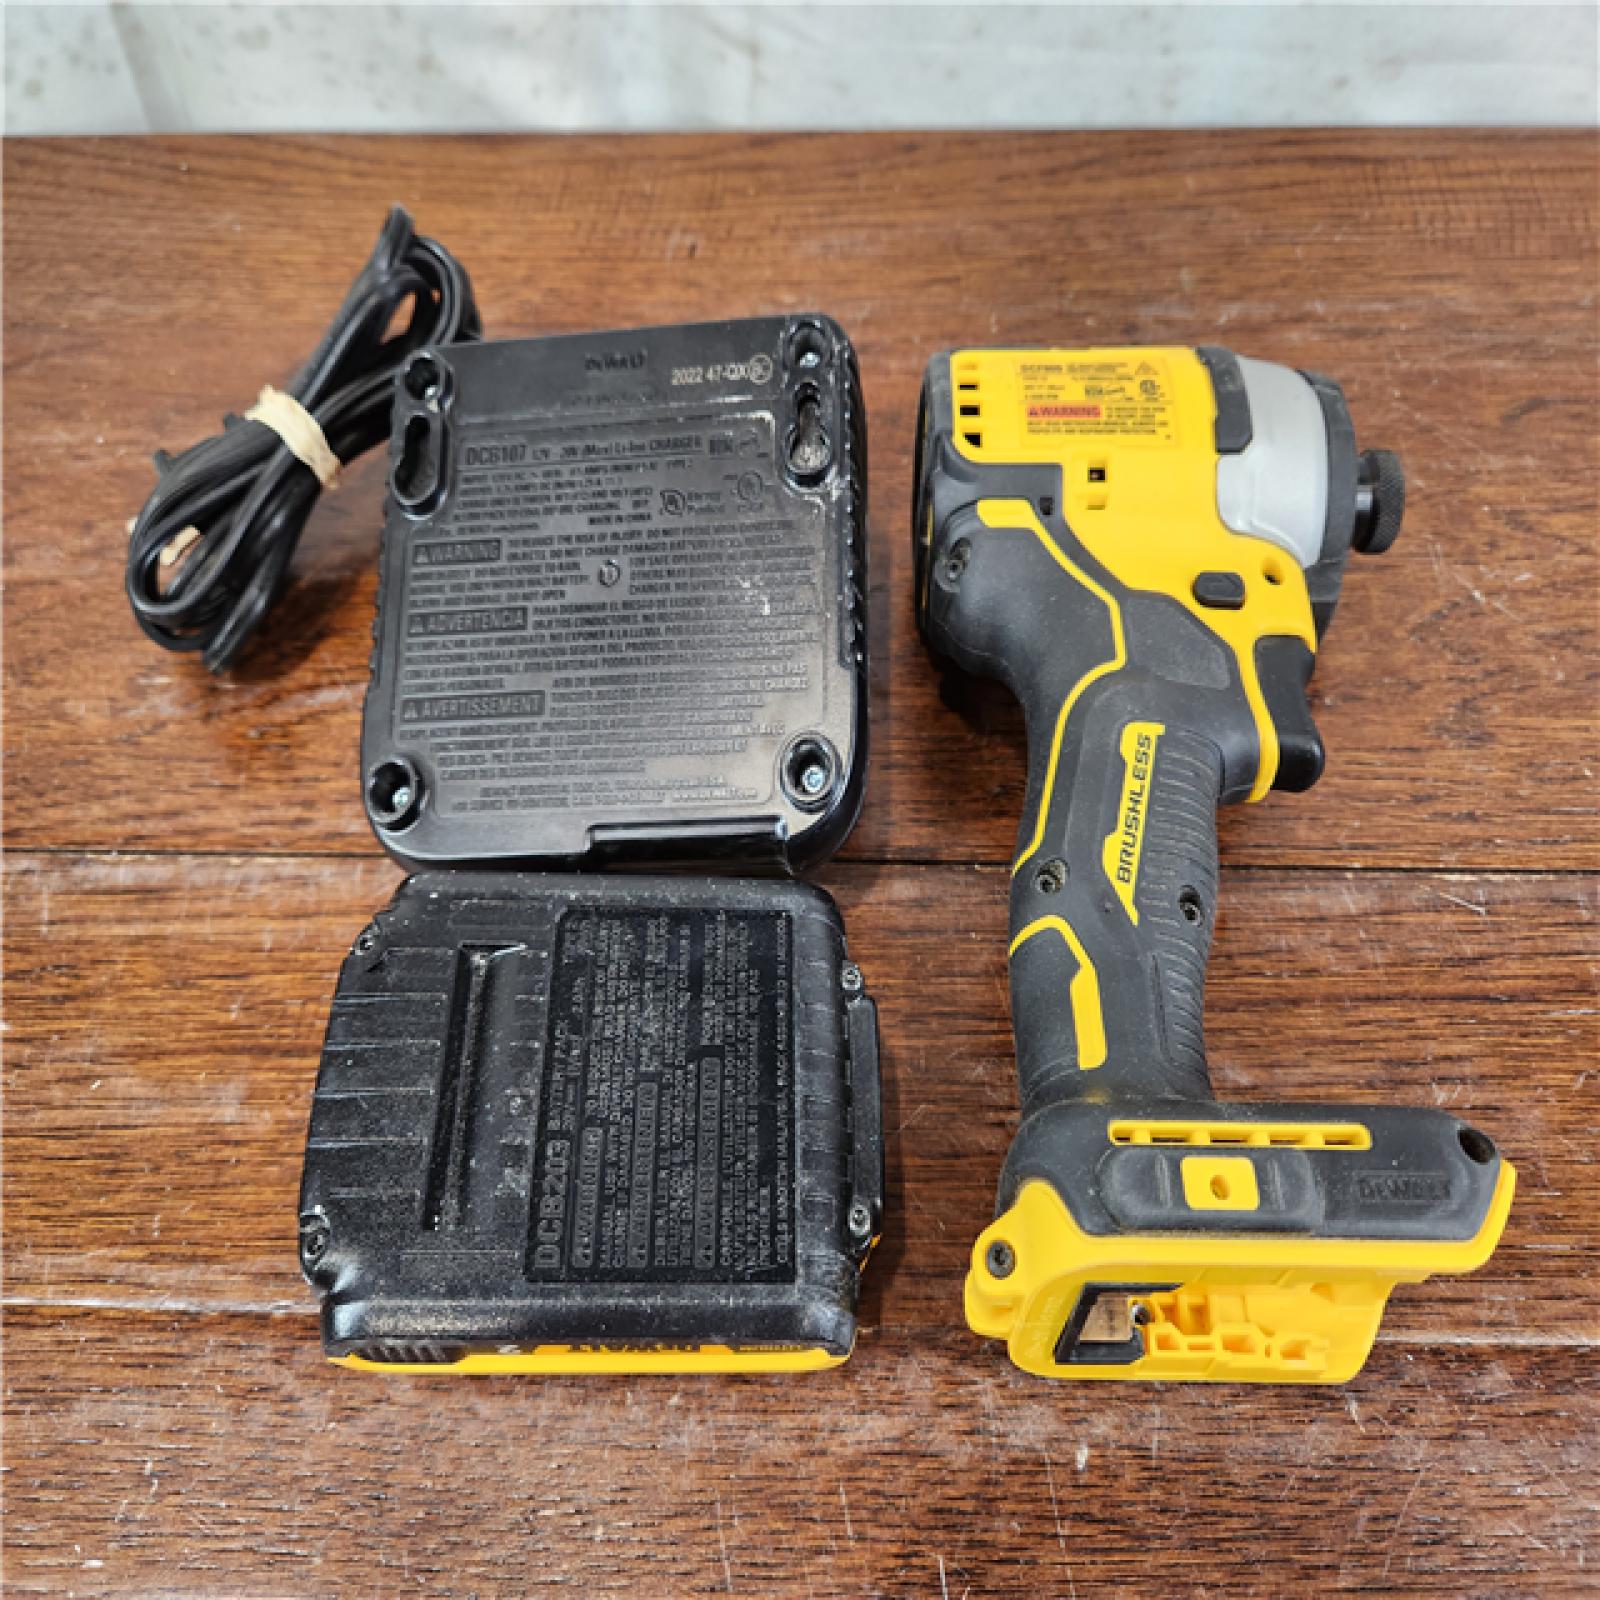 AS-IS DEWALT ATOMIC 20V MAX* Brushless Cordless Compact 1/4 in. Impact Driver Kit